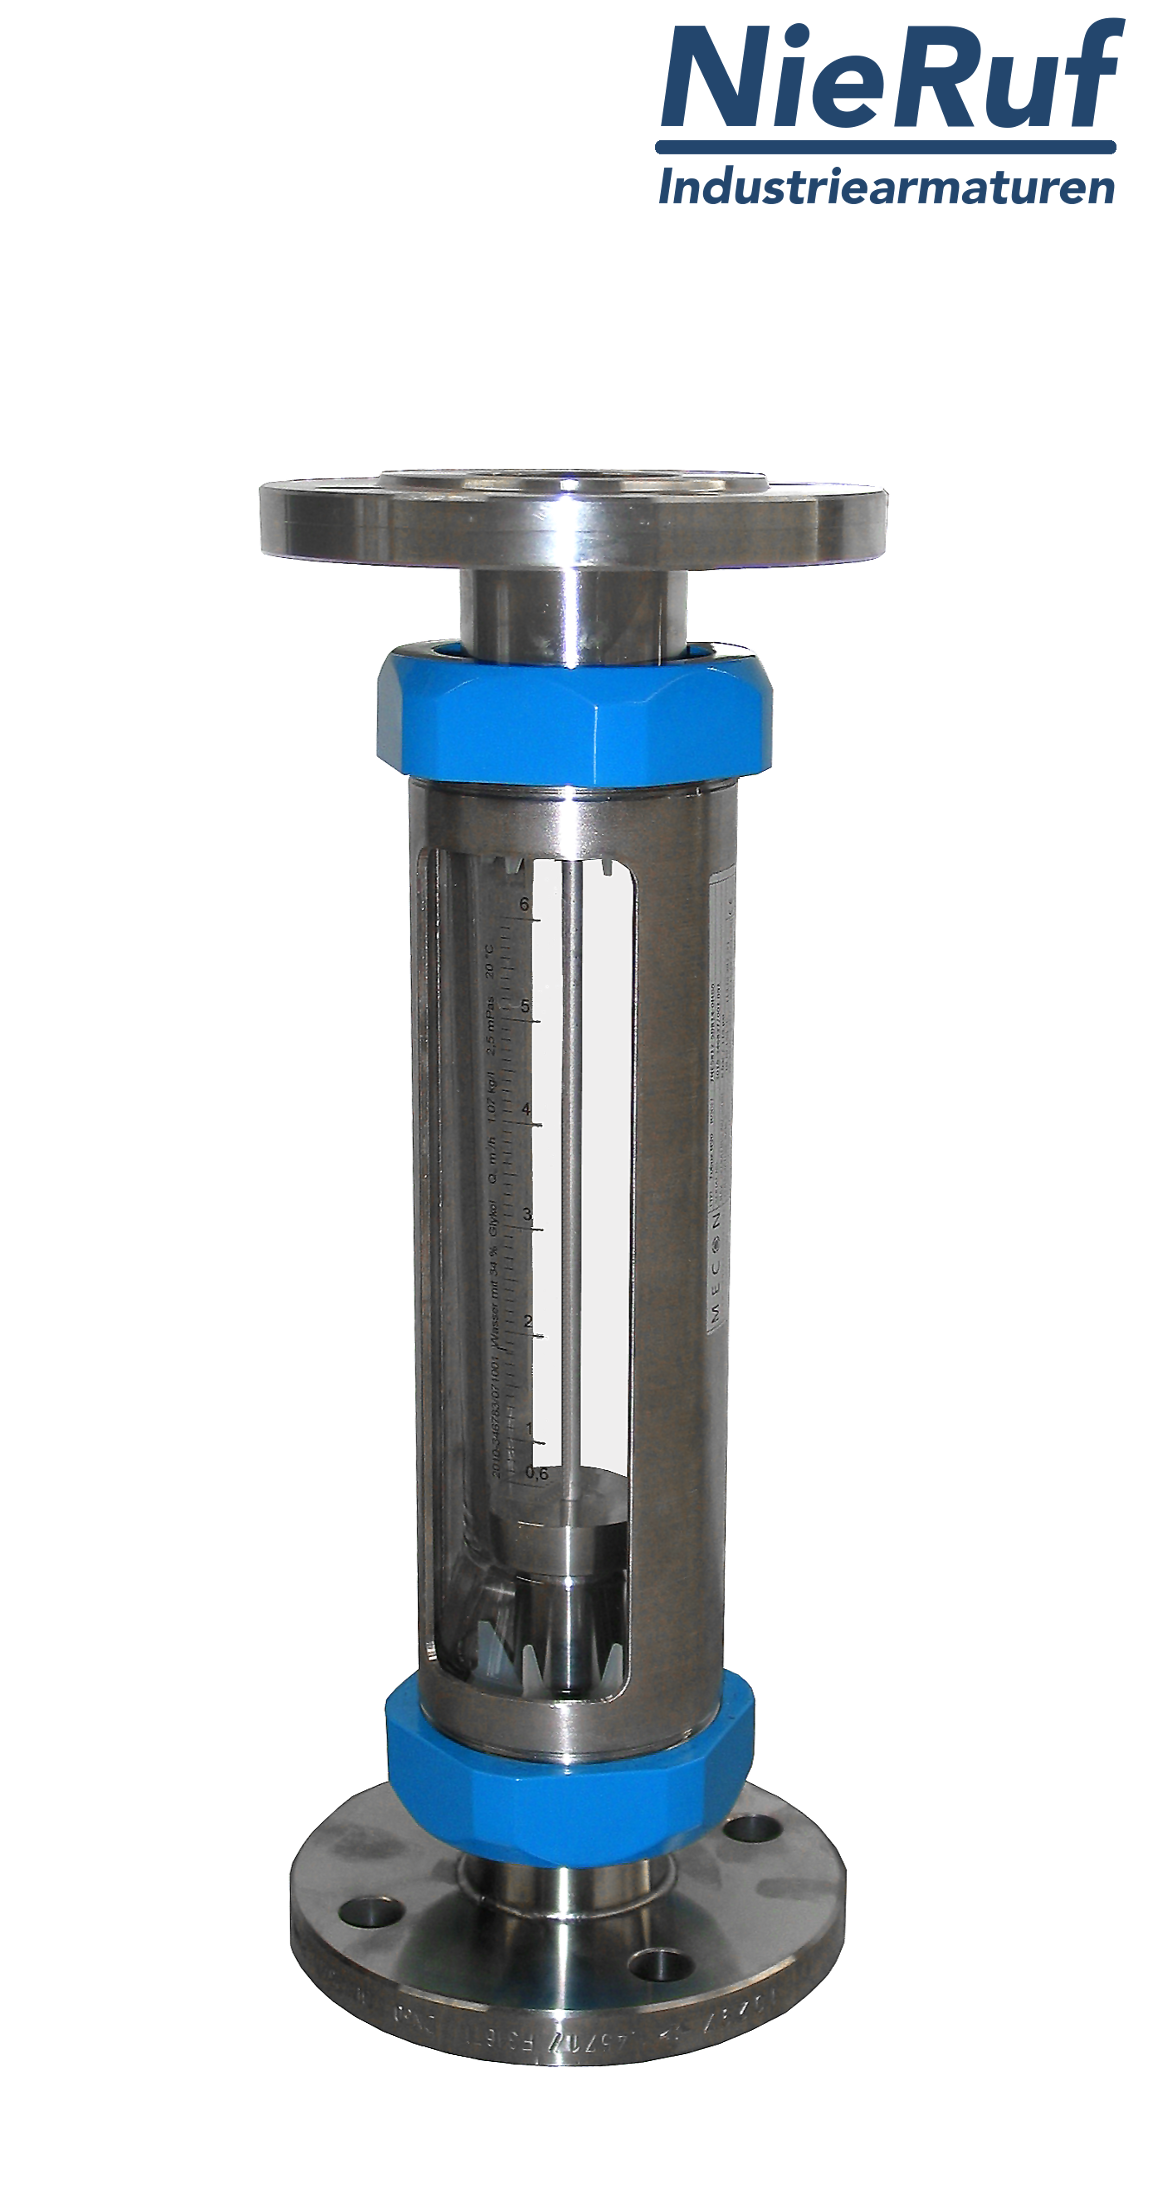 Variable area flowmeter stainless steel + borosilicate flange DN15 10.0 - 100.0 l/h water FKM